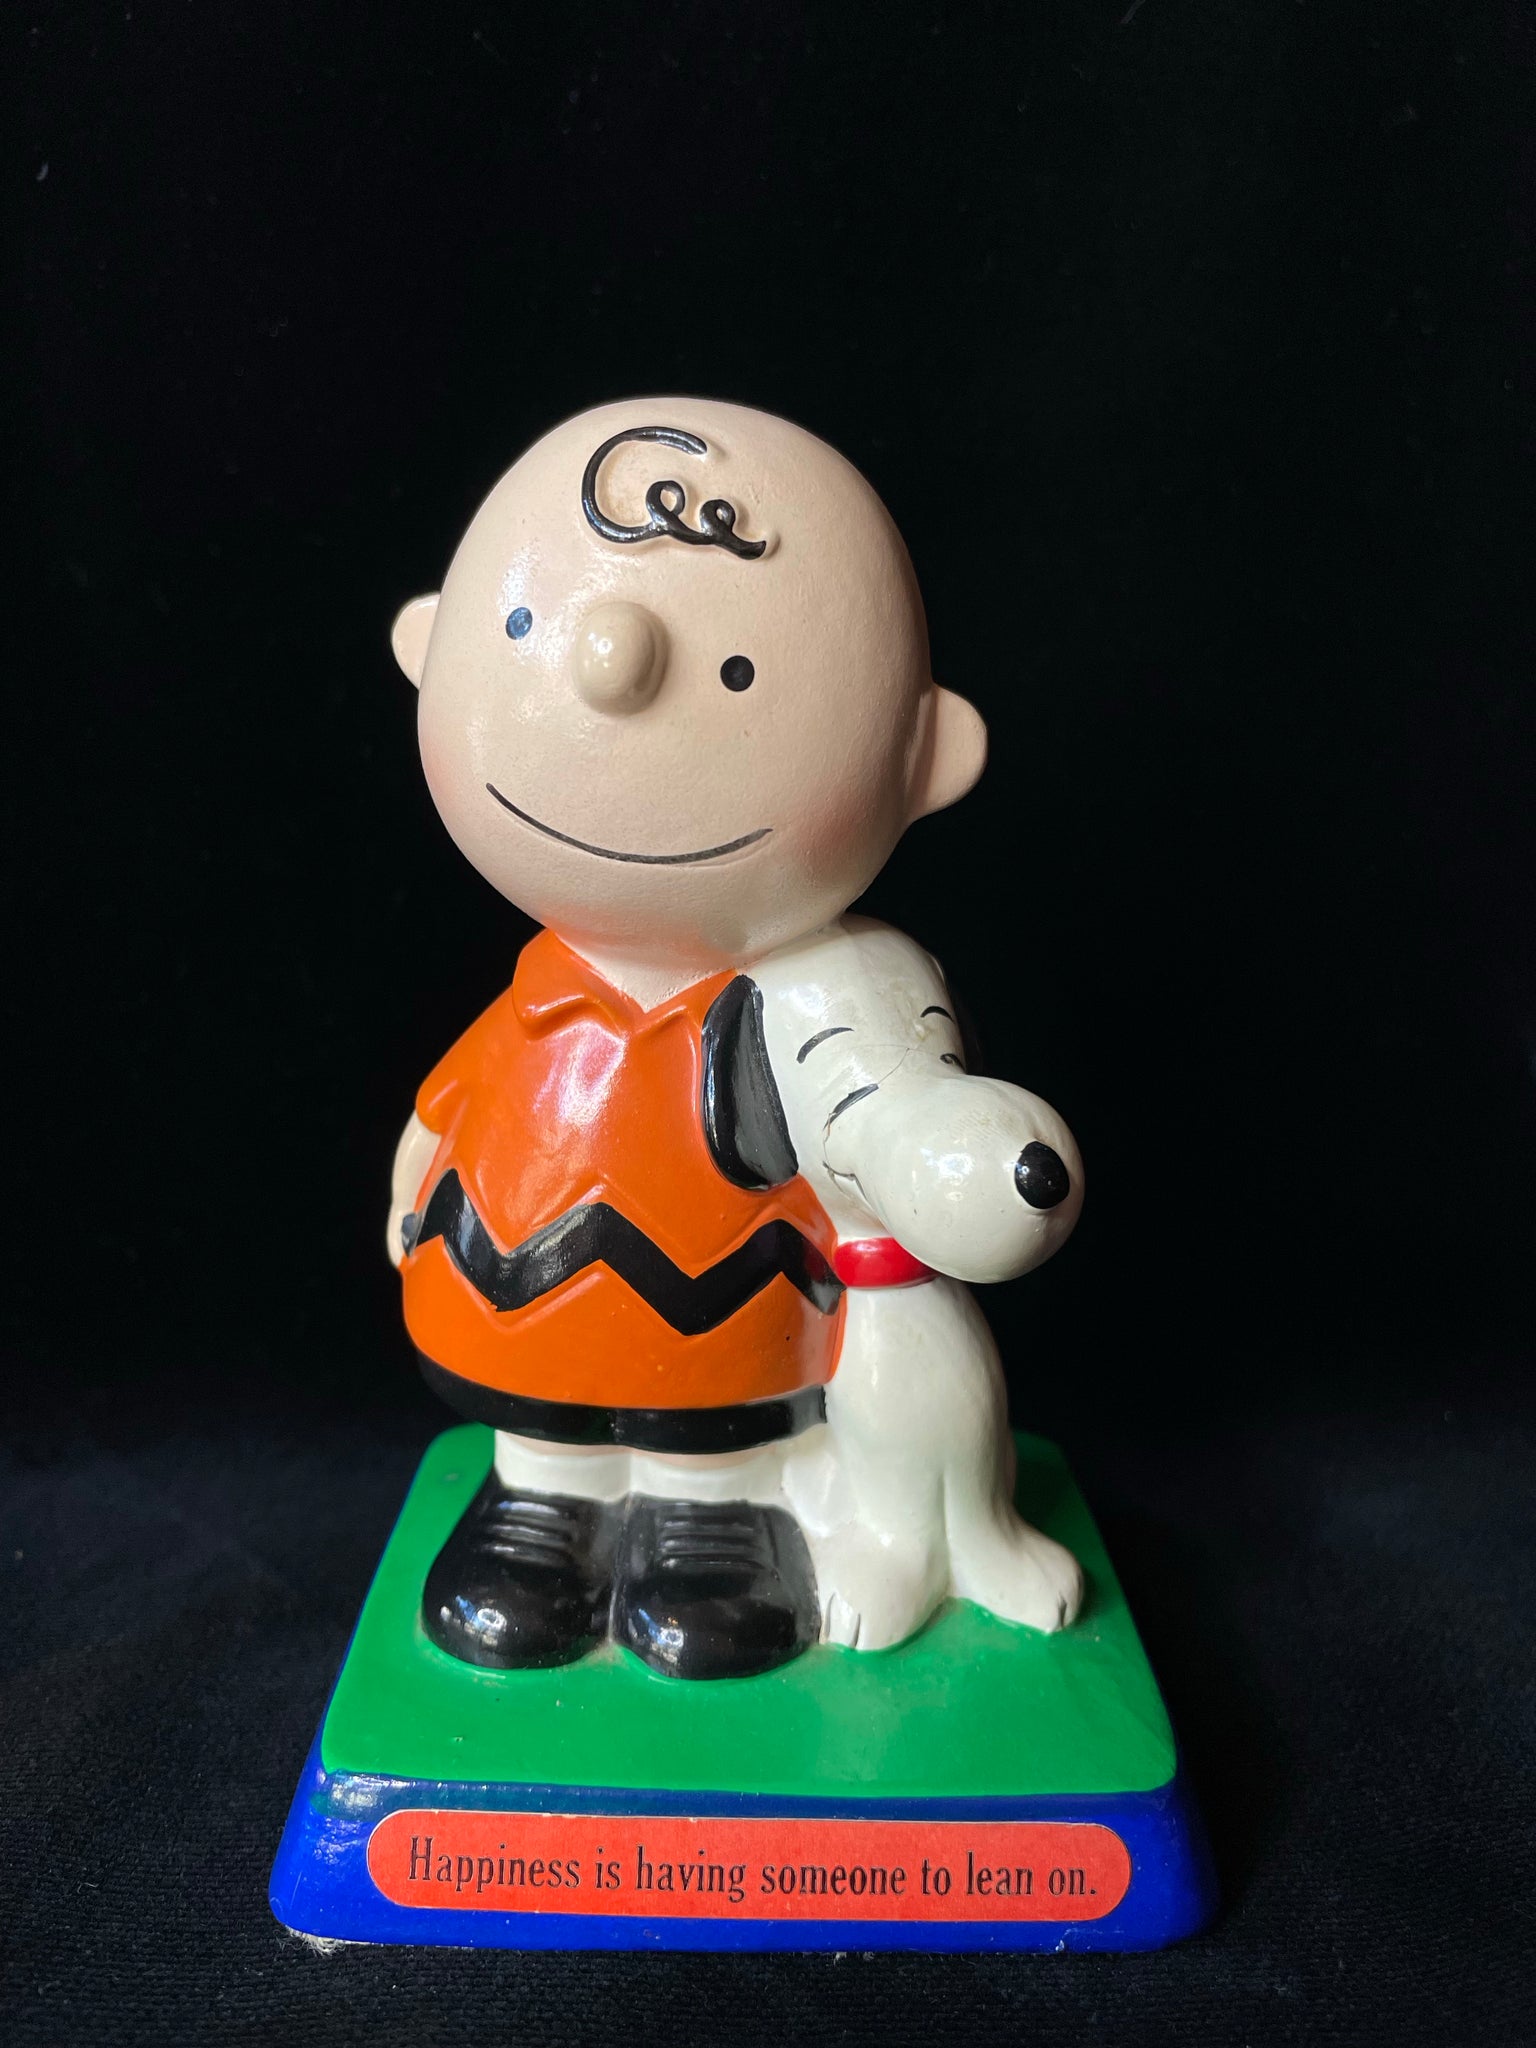 1971 Snoopy and Charlie Brown Happiness Figurine